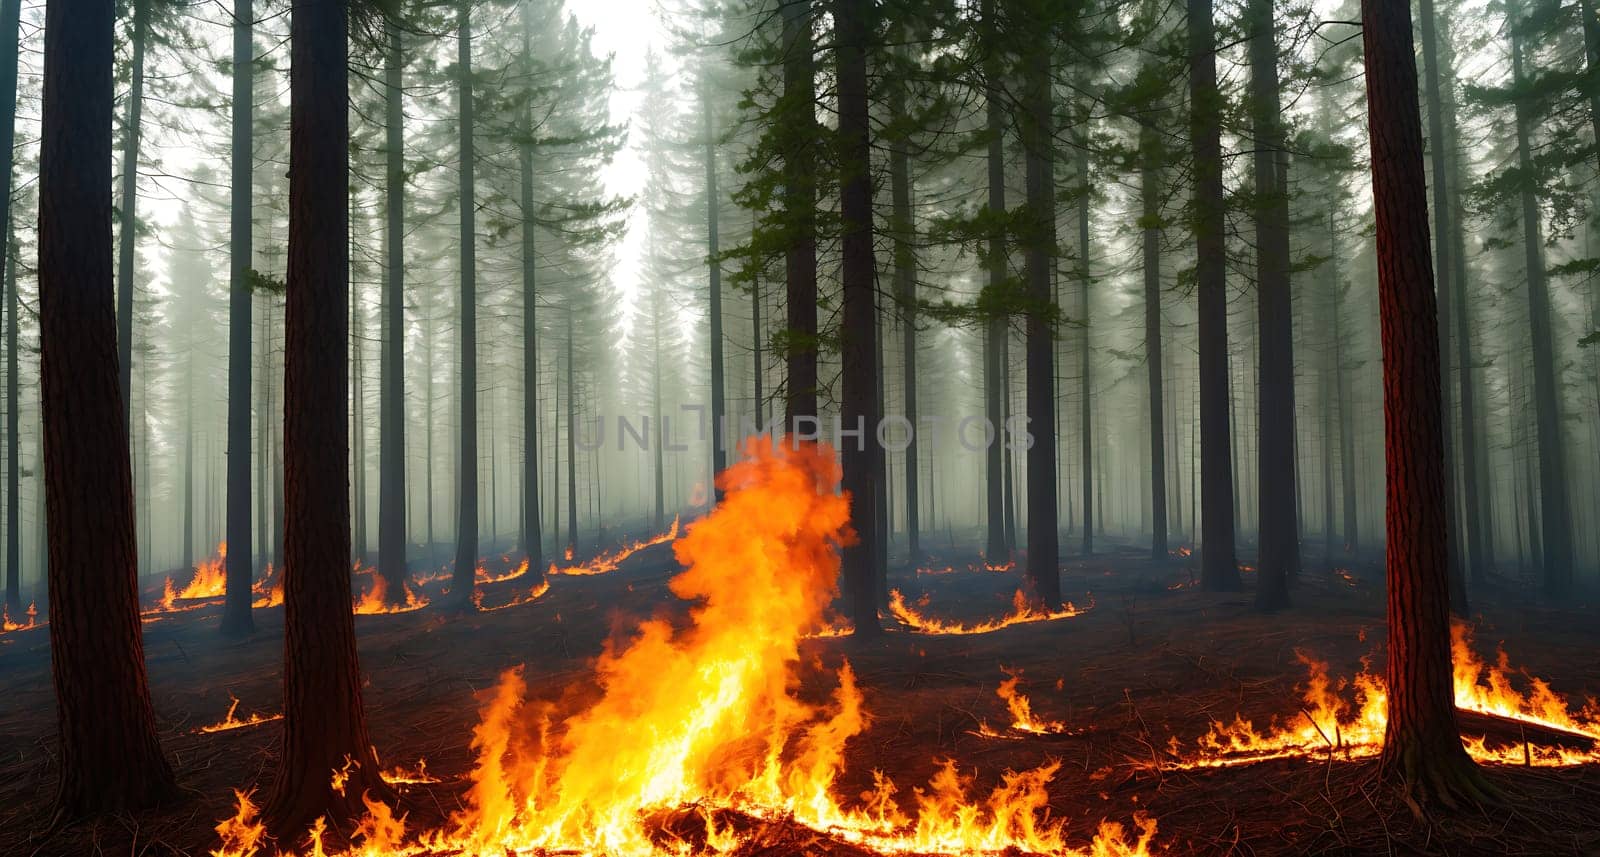 A forest fire in the middle of a dense forest. by creart